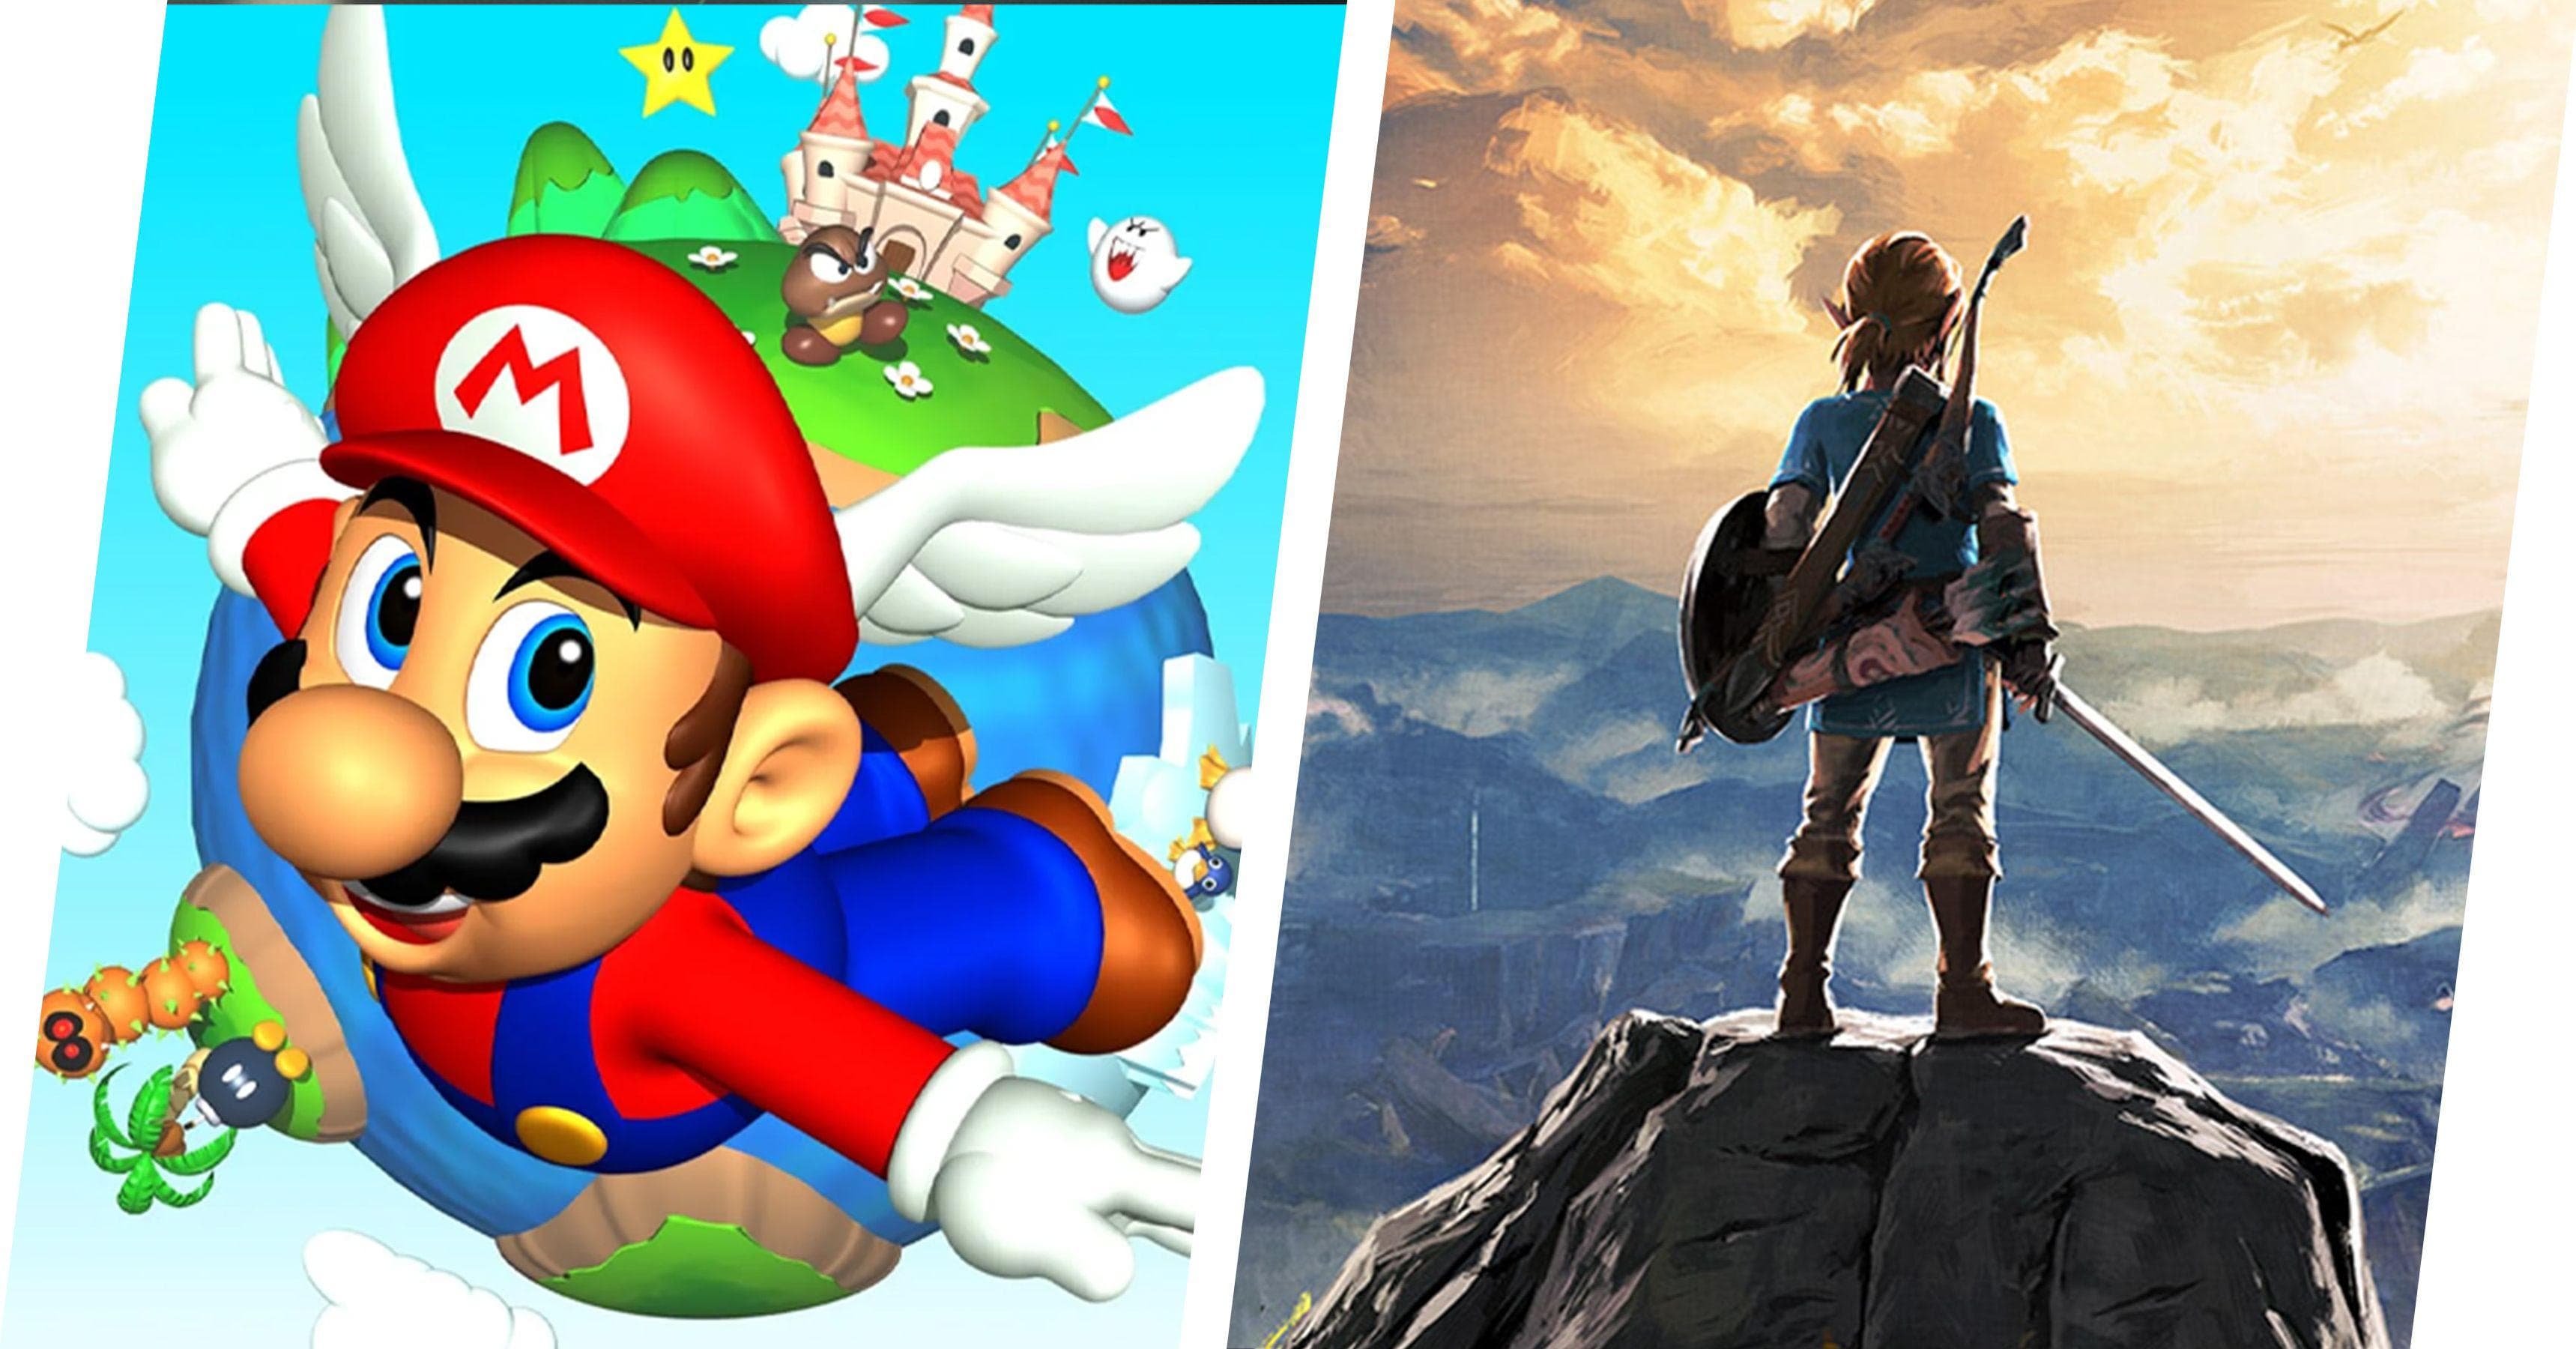 15 Best Video Games of All Time - Ranking the Most Influential Gaming Titles